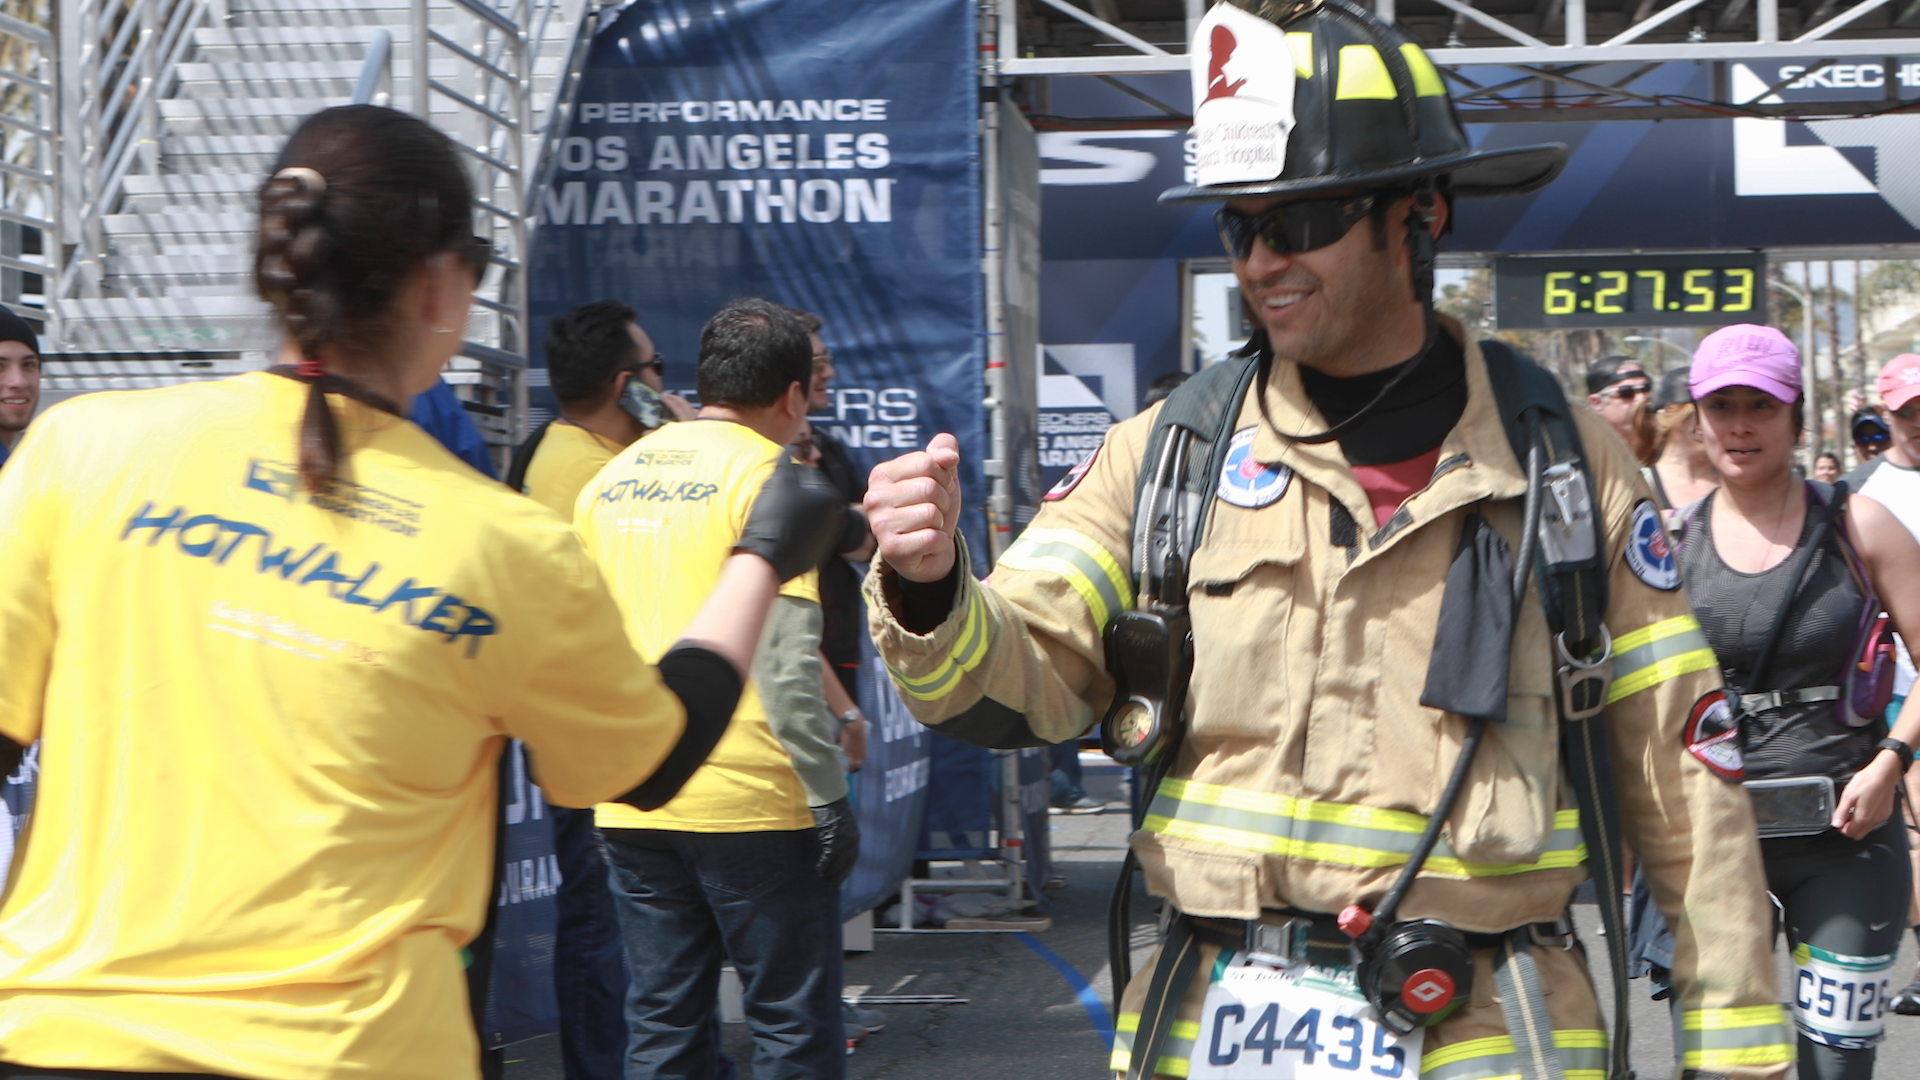 Jose Zambrano giving a fist pump to a fan at the finish line of a marathon.